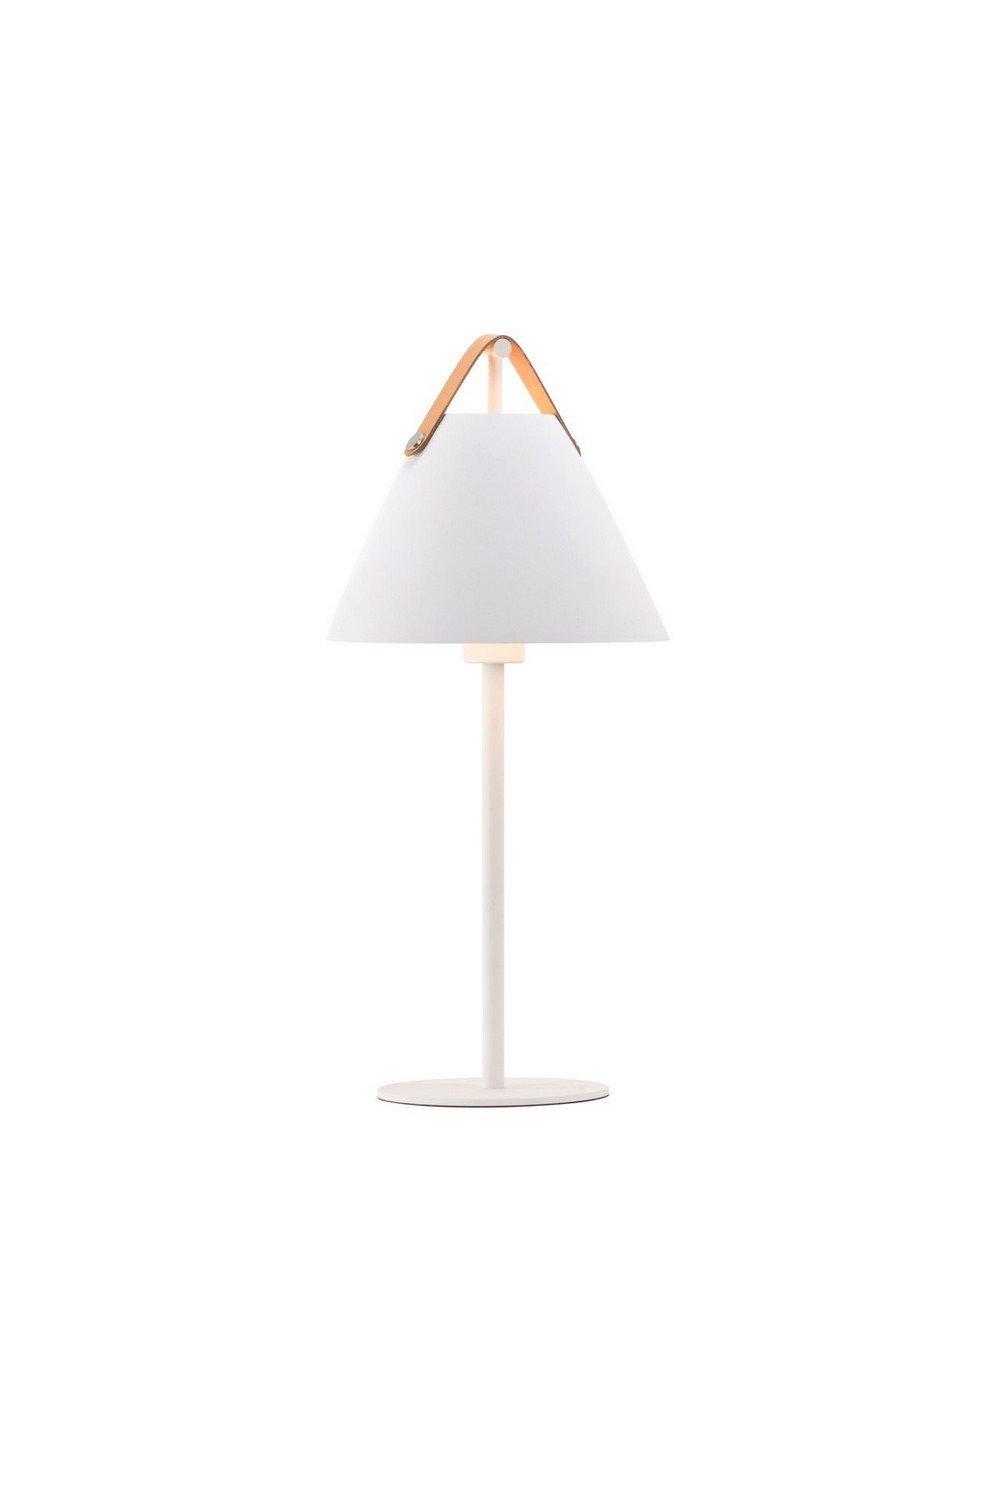 Strap Table Lamp with Round Tapered Shade White E27